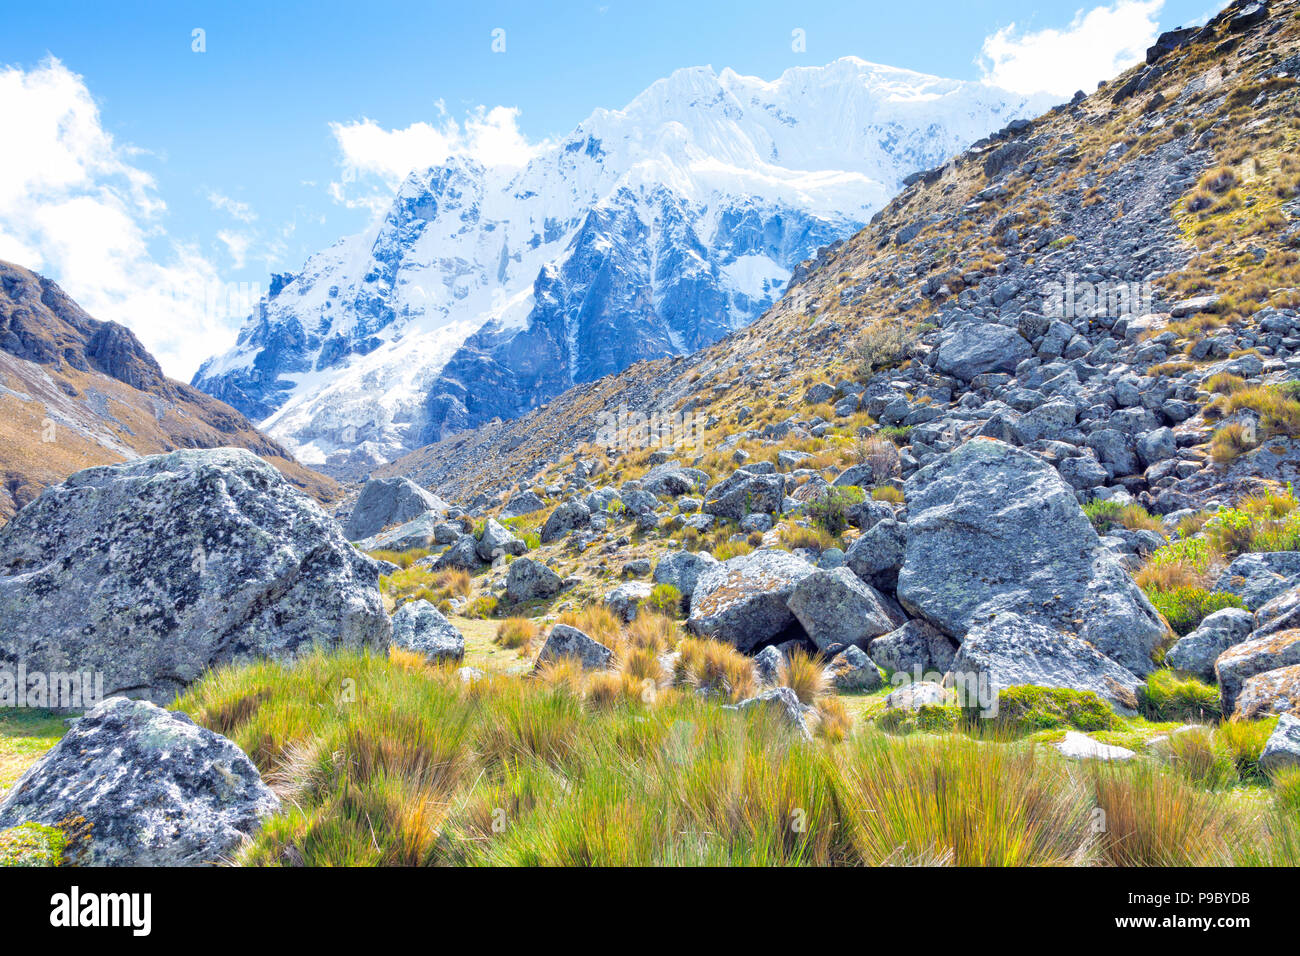 Scenic view of Salkantay snowy Andean mountain, rocky path from a trek to Machu Picchu . Stock Photo